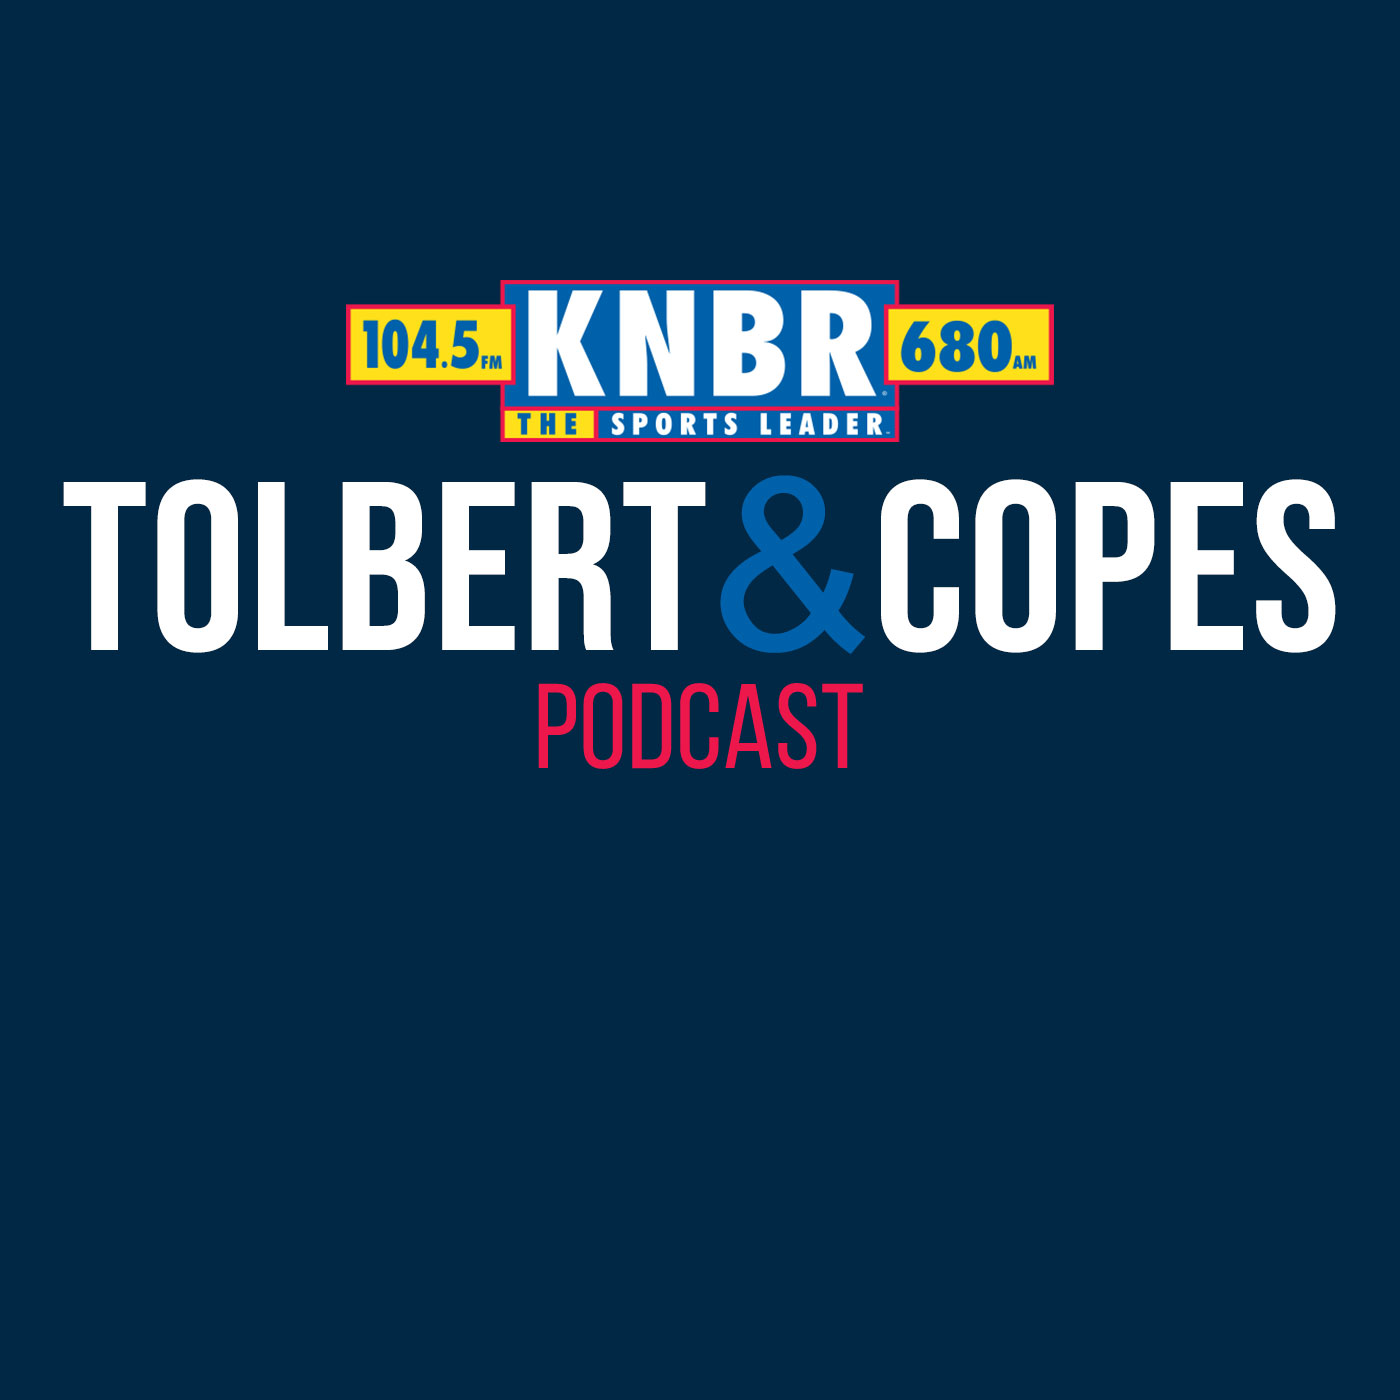 11-17 Dr. Bob Stoll joins Tolbert & Copes to pick games for this weekend's game in college football & NFL